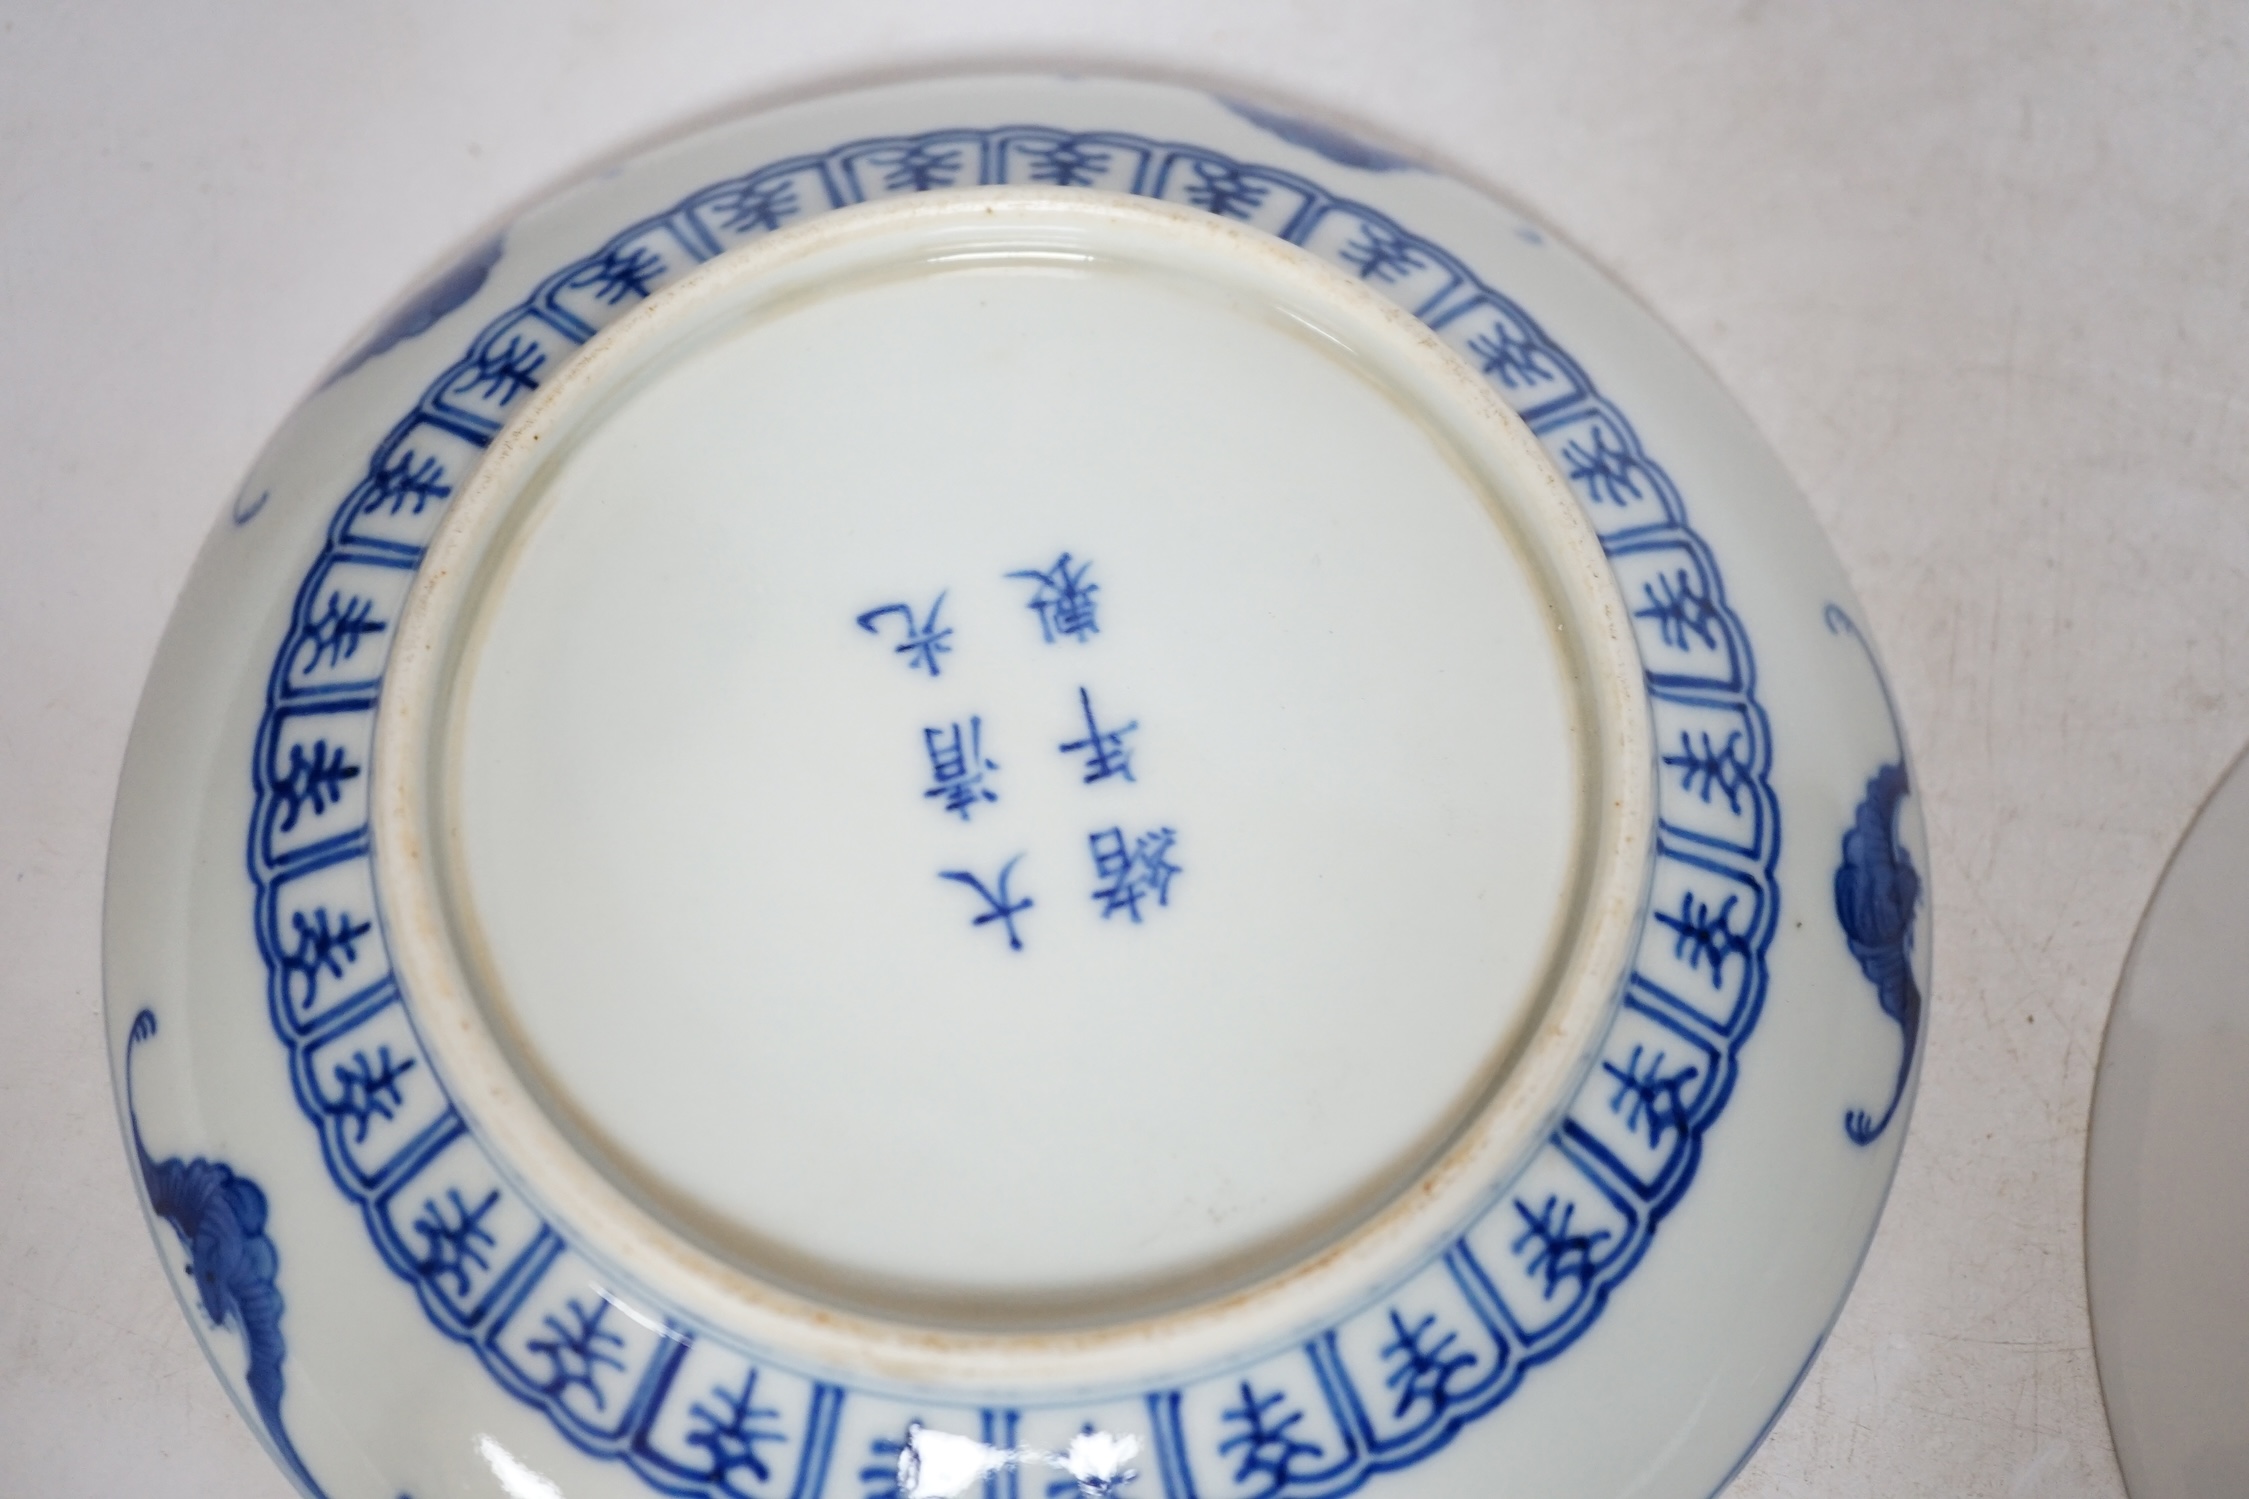 Four Chinese or Japanese porcelain saucers, largest 16.5 cm diameter - Image 8 of 9